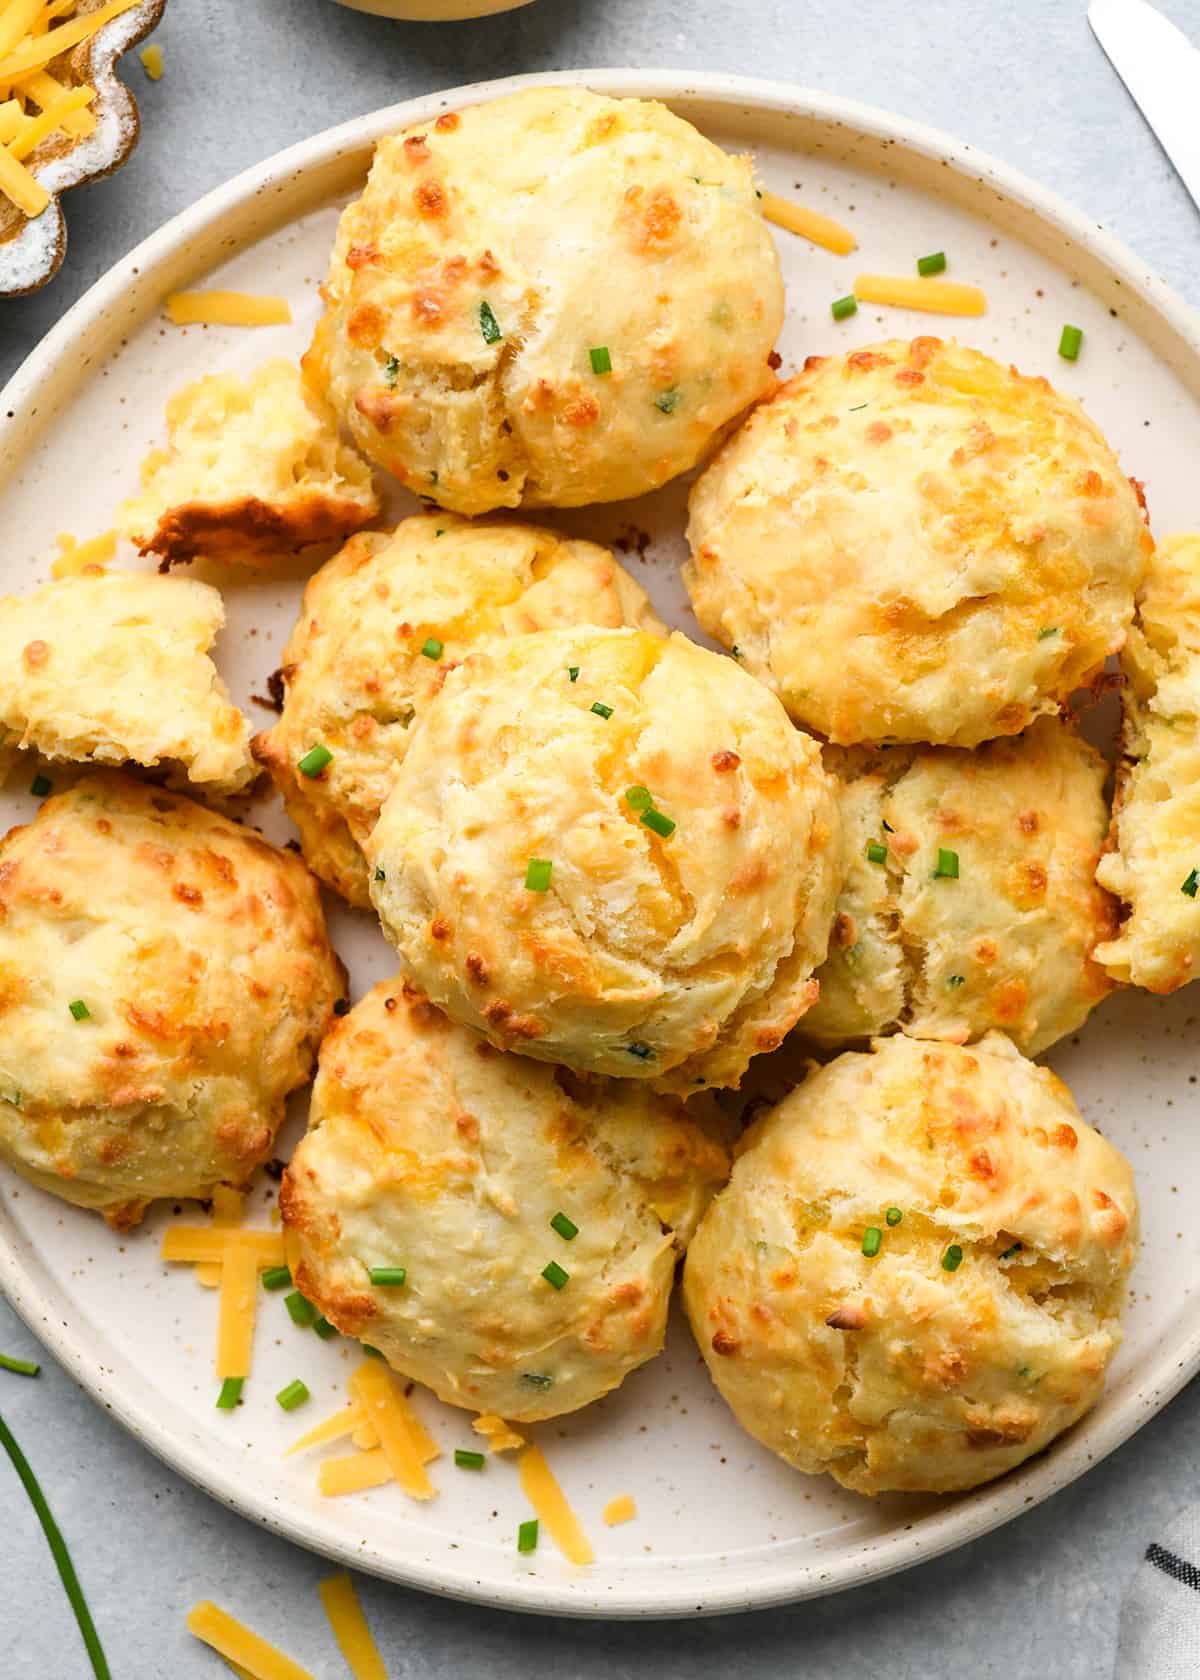 9 cheese biscuits on a plate